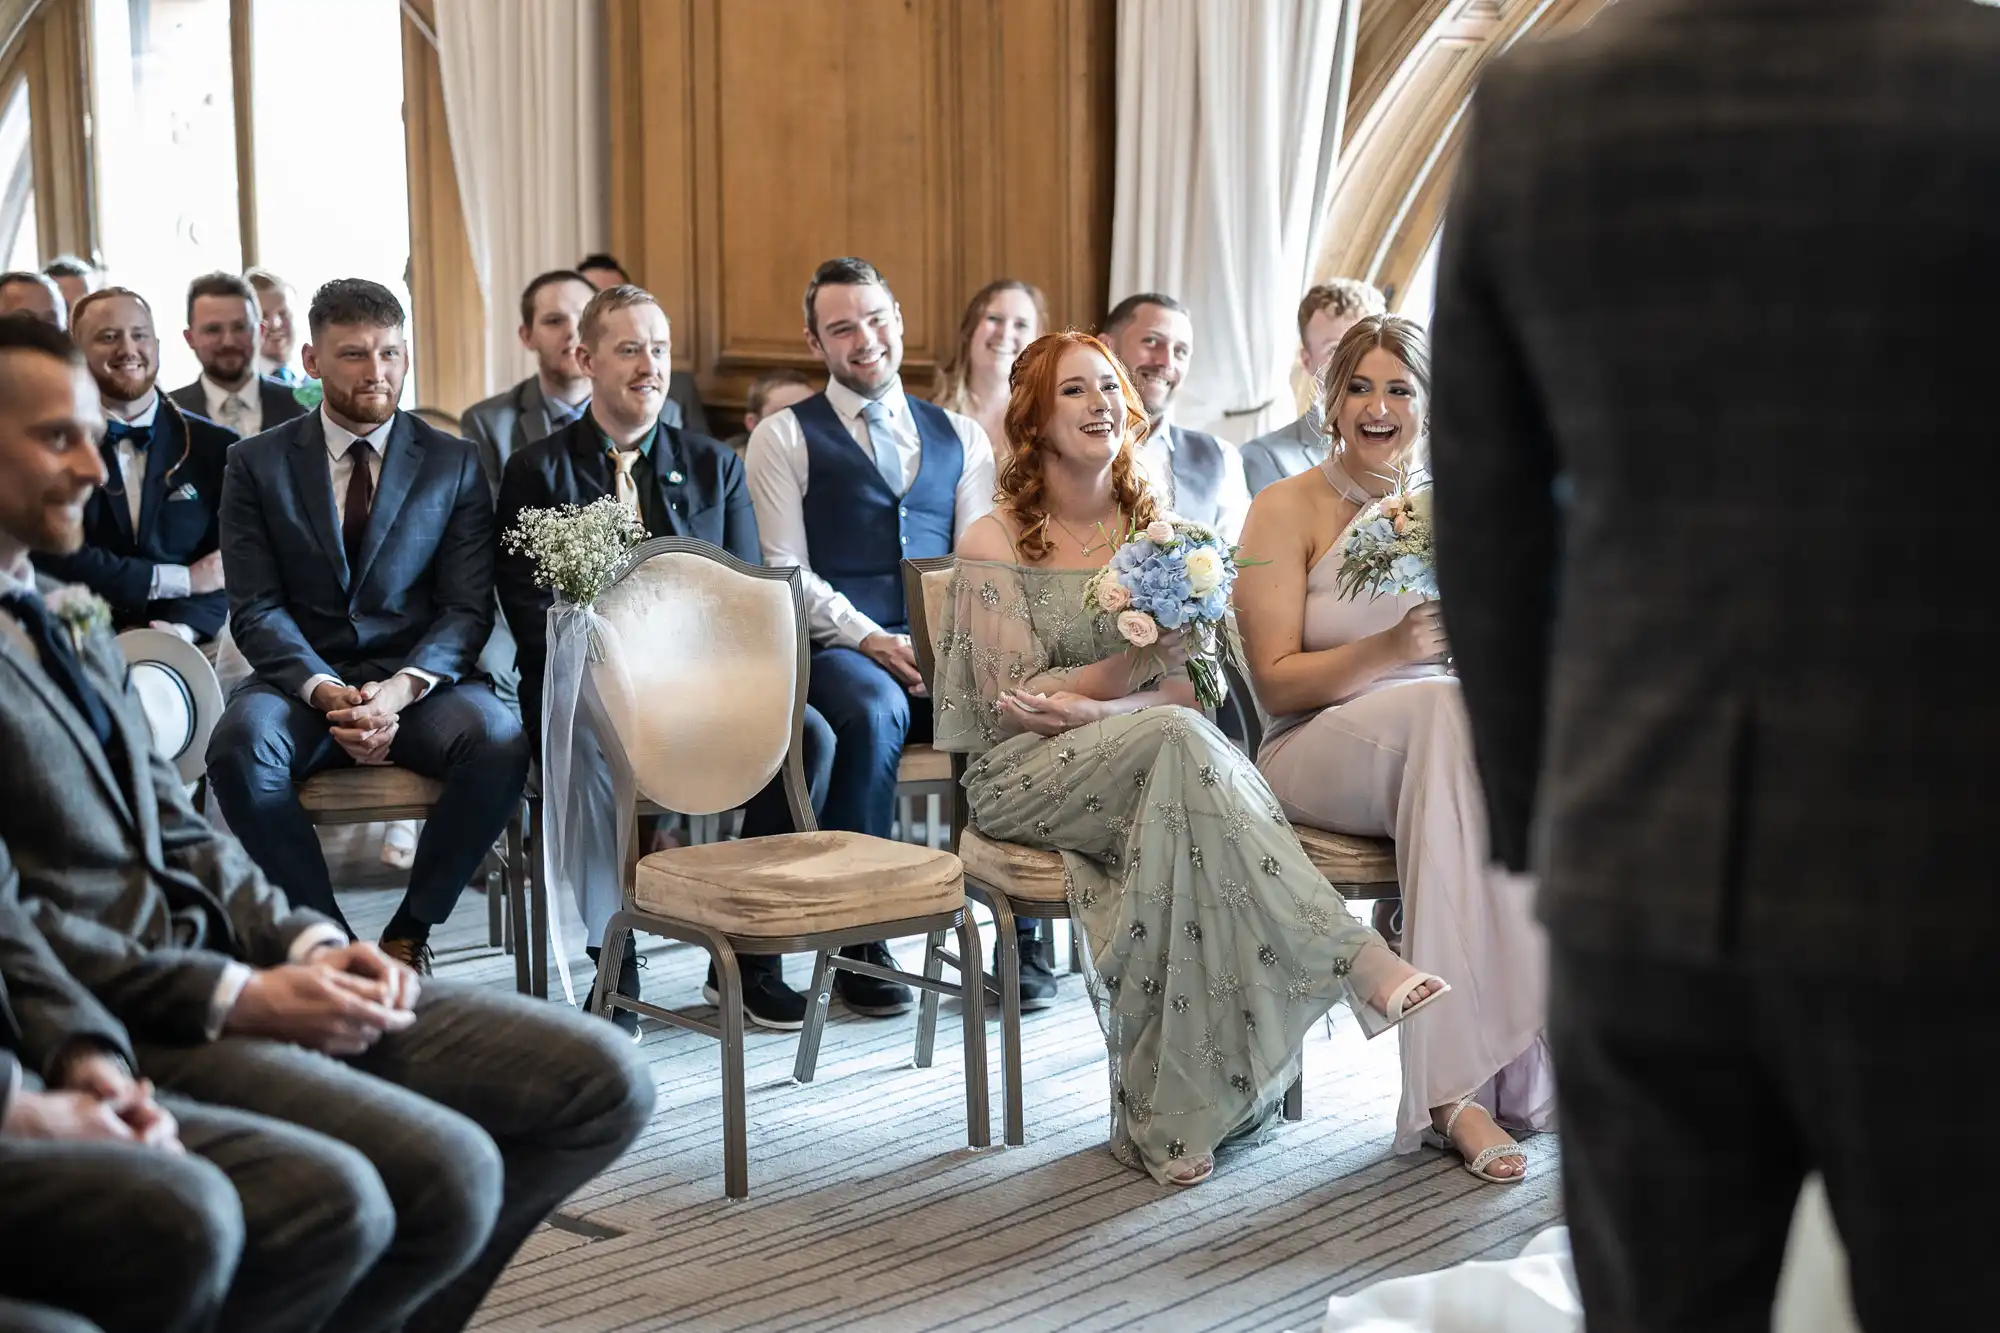 A wedding ceremony in a bright room with guests smiling at a bride, who is seated in the center holding a bouquet.